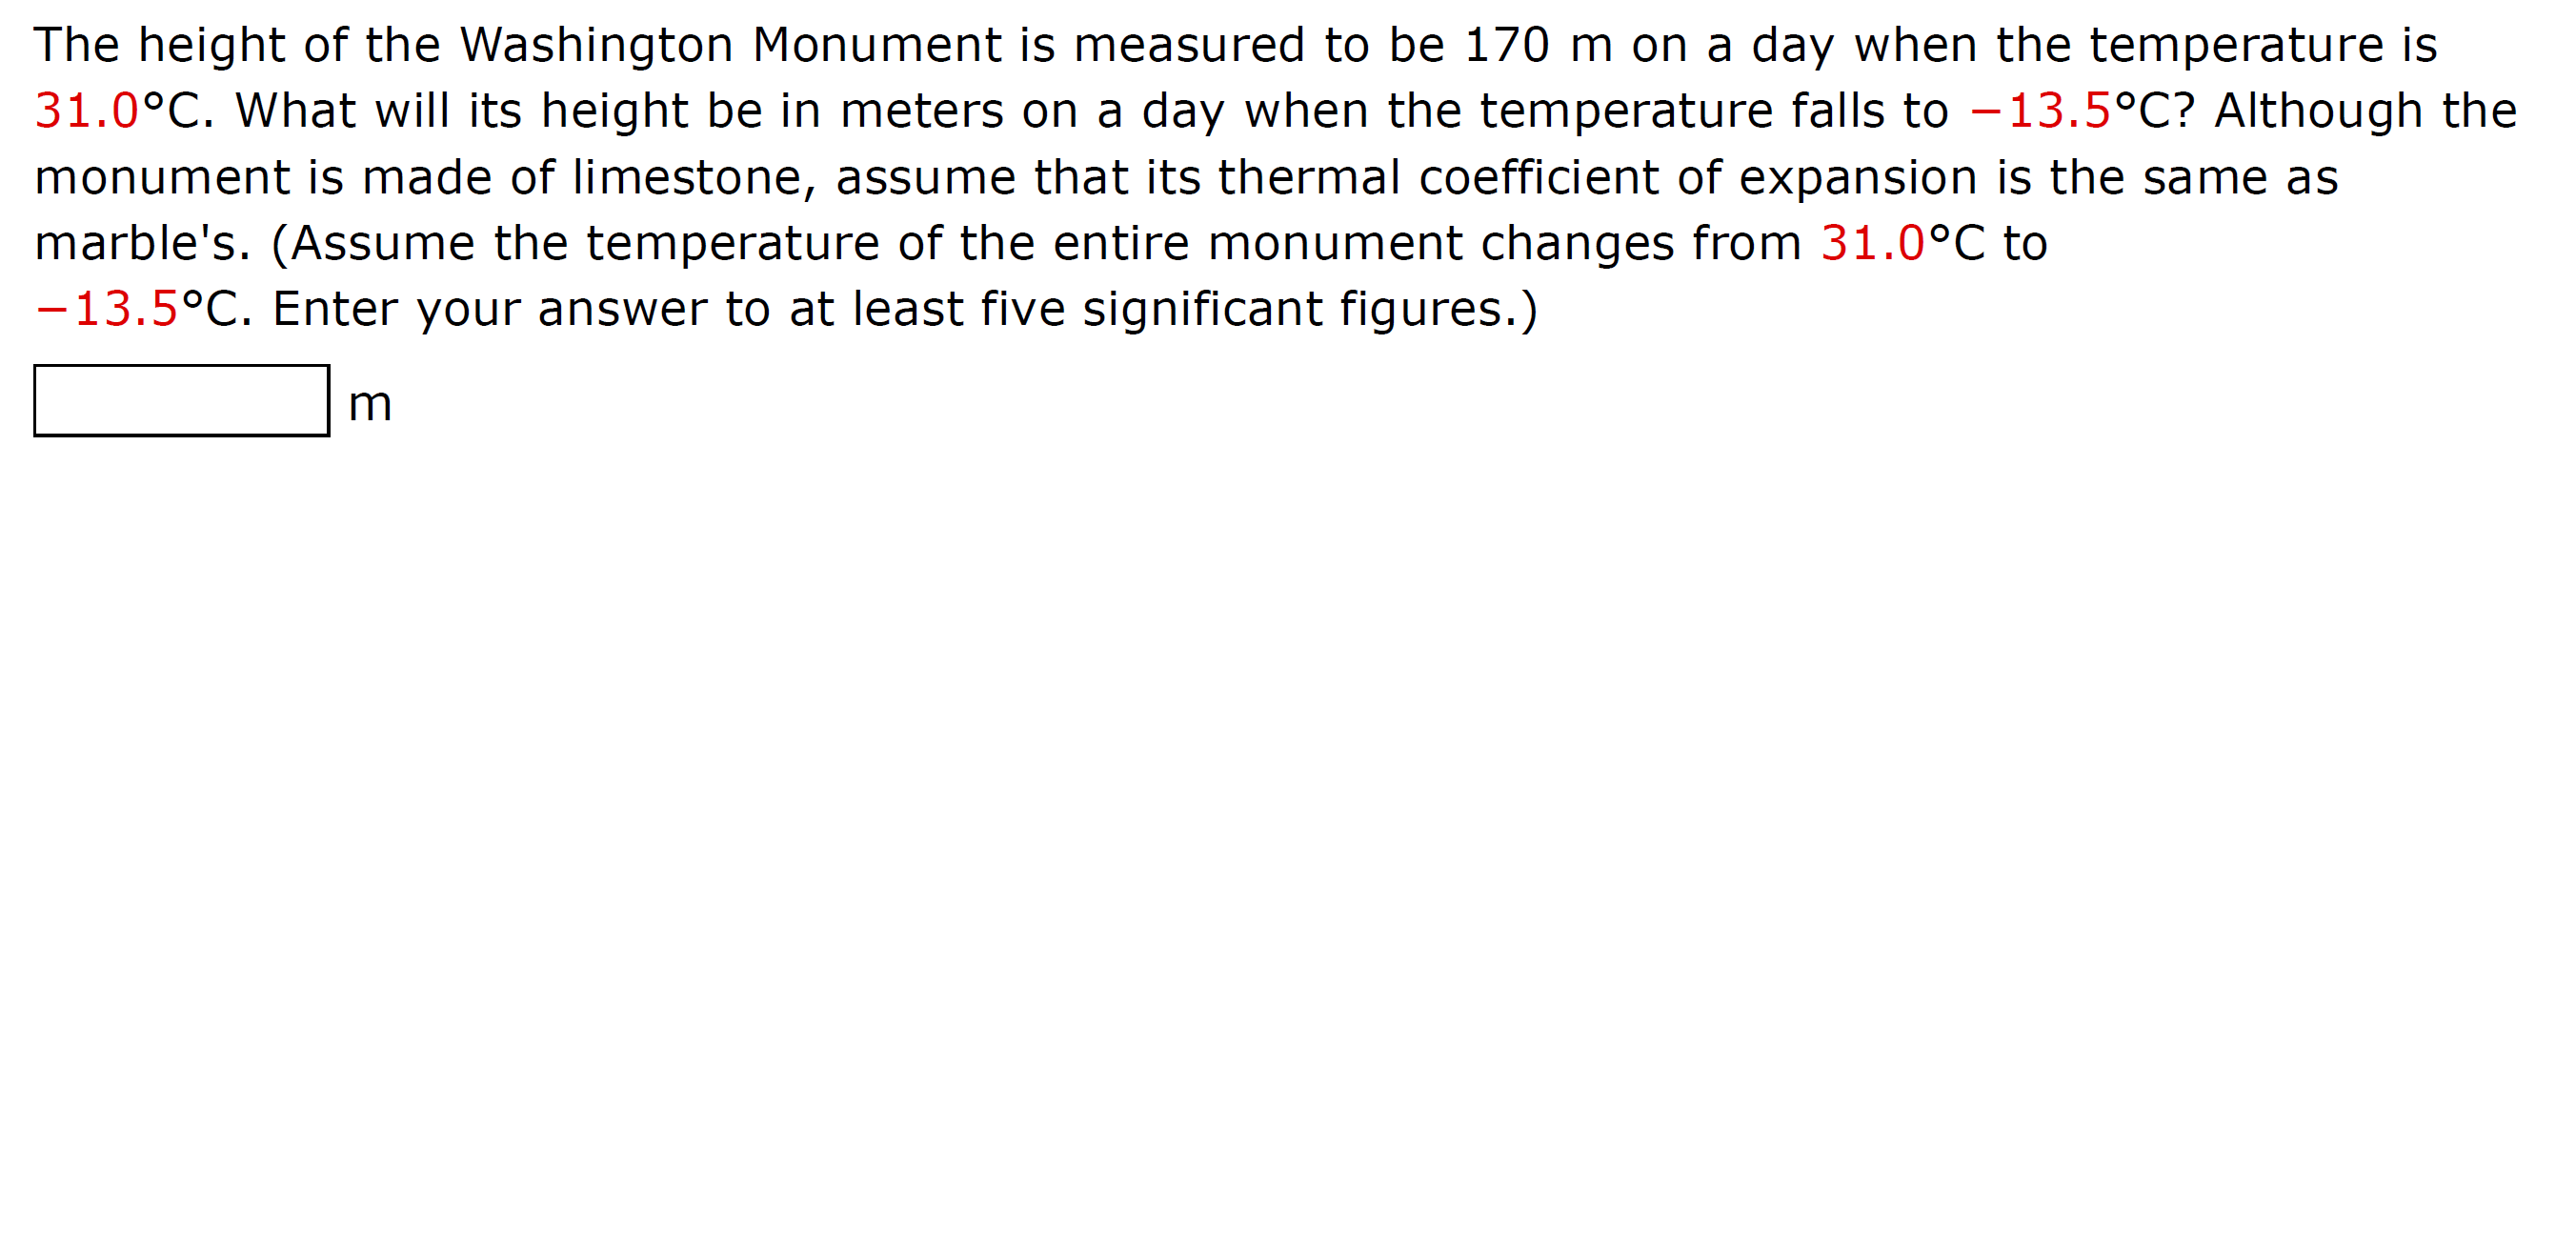 The height of the Washington Monument is measured to be 170 m on a day when the temperature is
31.0°C. What will its height be in meters on a day when the temperature falls to –13.5°C? Although the
monument is made of limestone, assume that its thermal coefficient of expansion is the same as
marble's. (Assume the temperature of the entire monument changes from 31.0°C to
-13.5°C. Enter your answer to at least five significant figures.)
m
